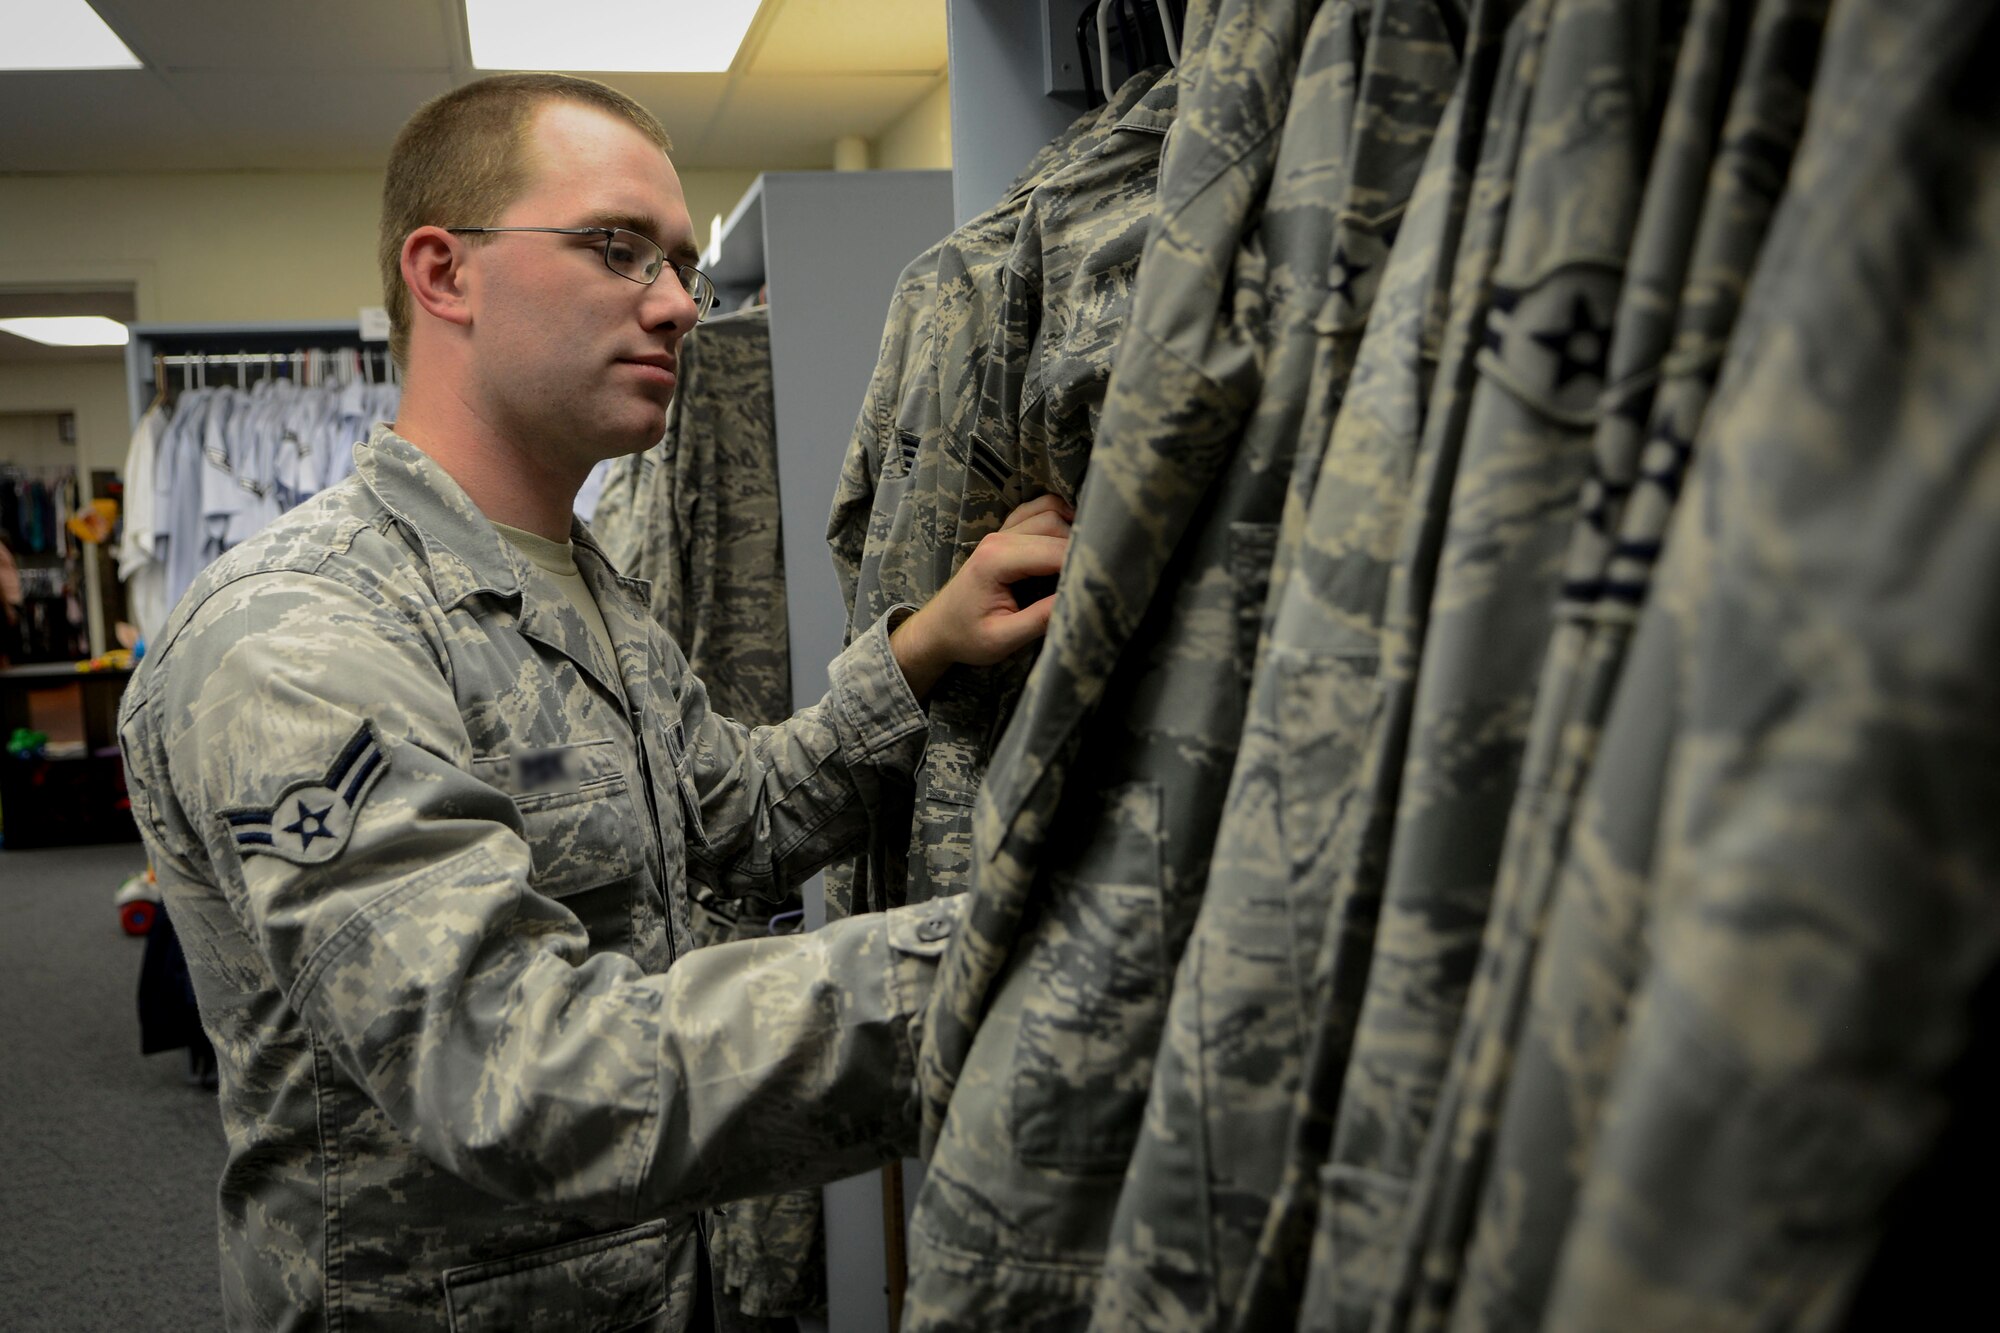 Airman 1st Class Colton, 9th Intelligence Squadron, looks for uniforms at the Airman’s Attic on Beale Air Force Base, Calif., July 15, 2014. The Airman’s Attic is a place where E-7s and below, as well as 0-3s and below, can get free clothing and household items. During the fourth Saturday of every month the Airman’s Attic is open to all ranks. (U.S. Air Force photo by Senior Airman Shana Wojcik/Released)